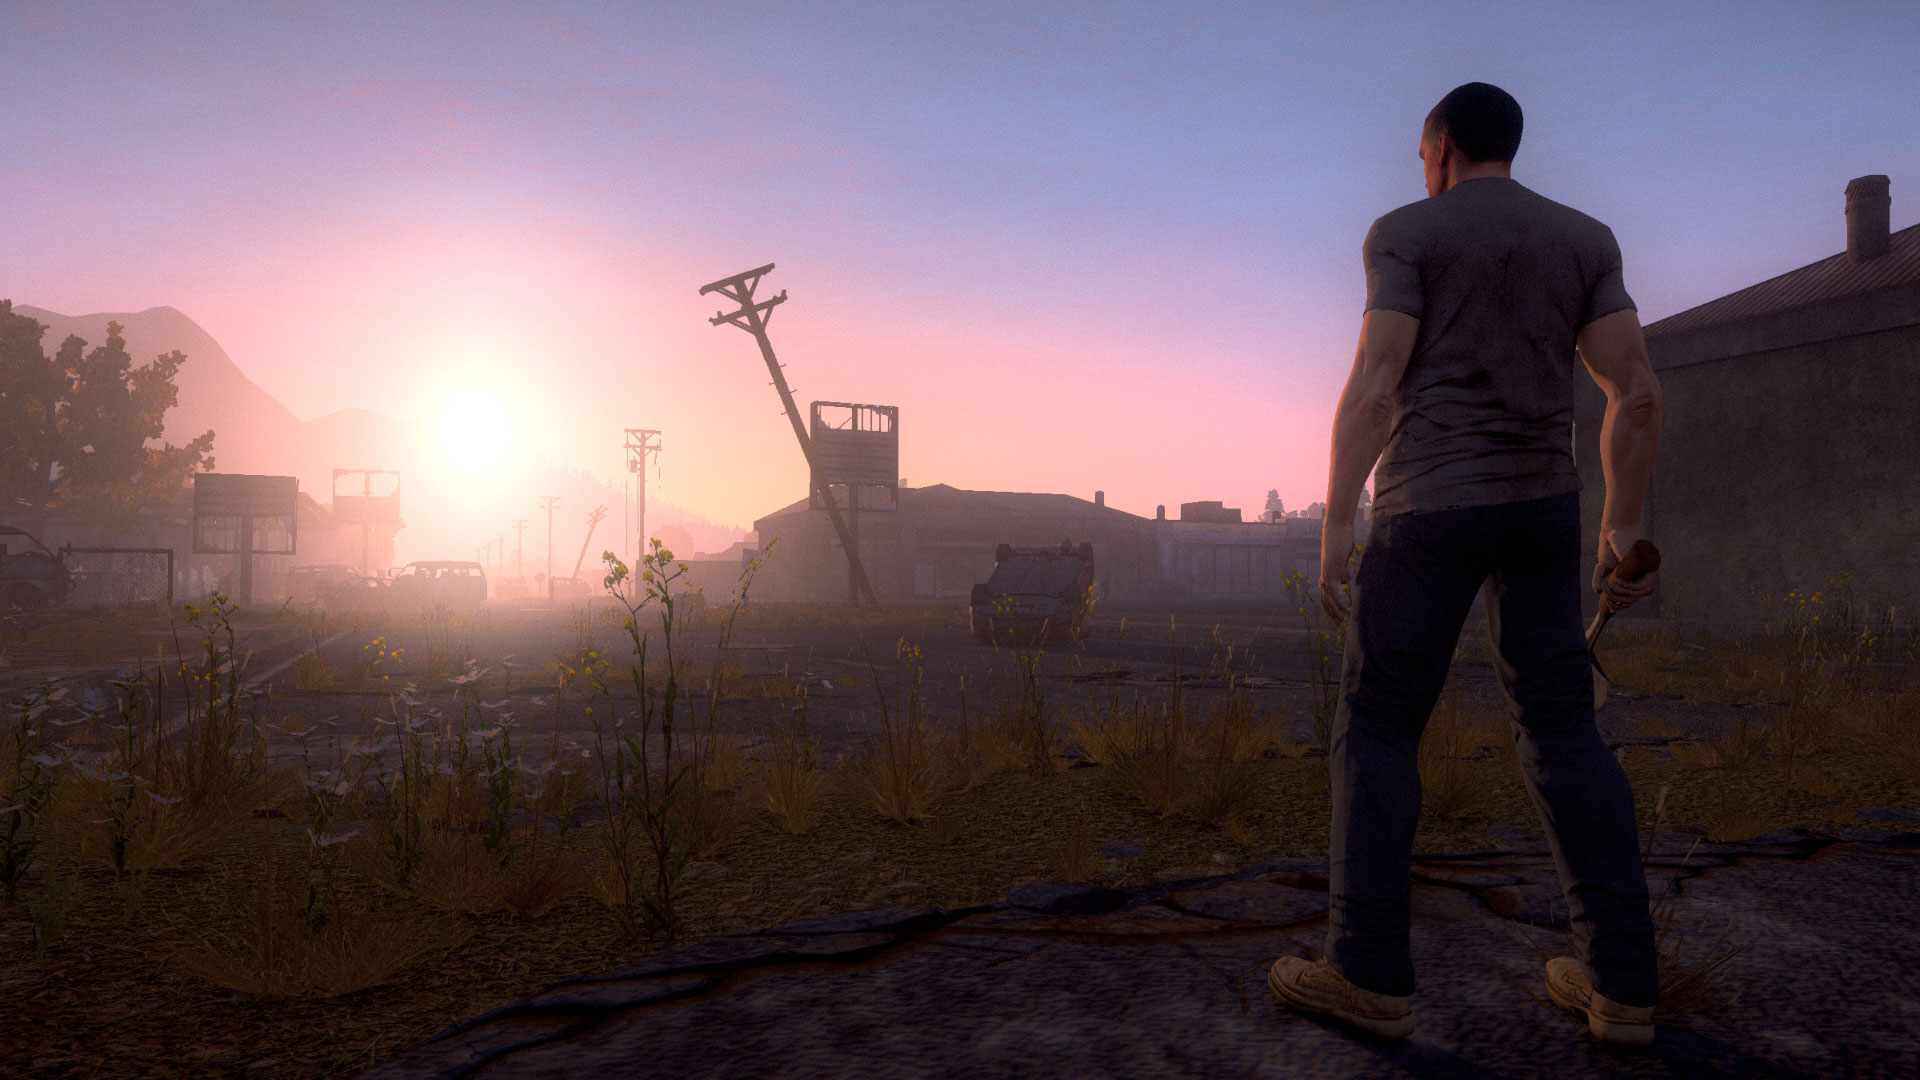 Sony Online Entertainment Hosts “H1Z1” 12-Hour Live Stream - “H1Z1” Trailer and Gameplay Highlighted in Stream